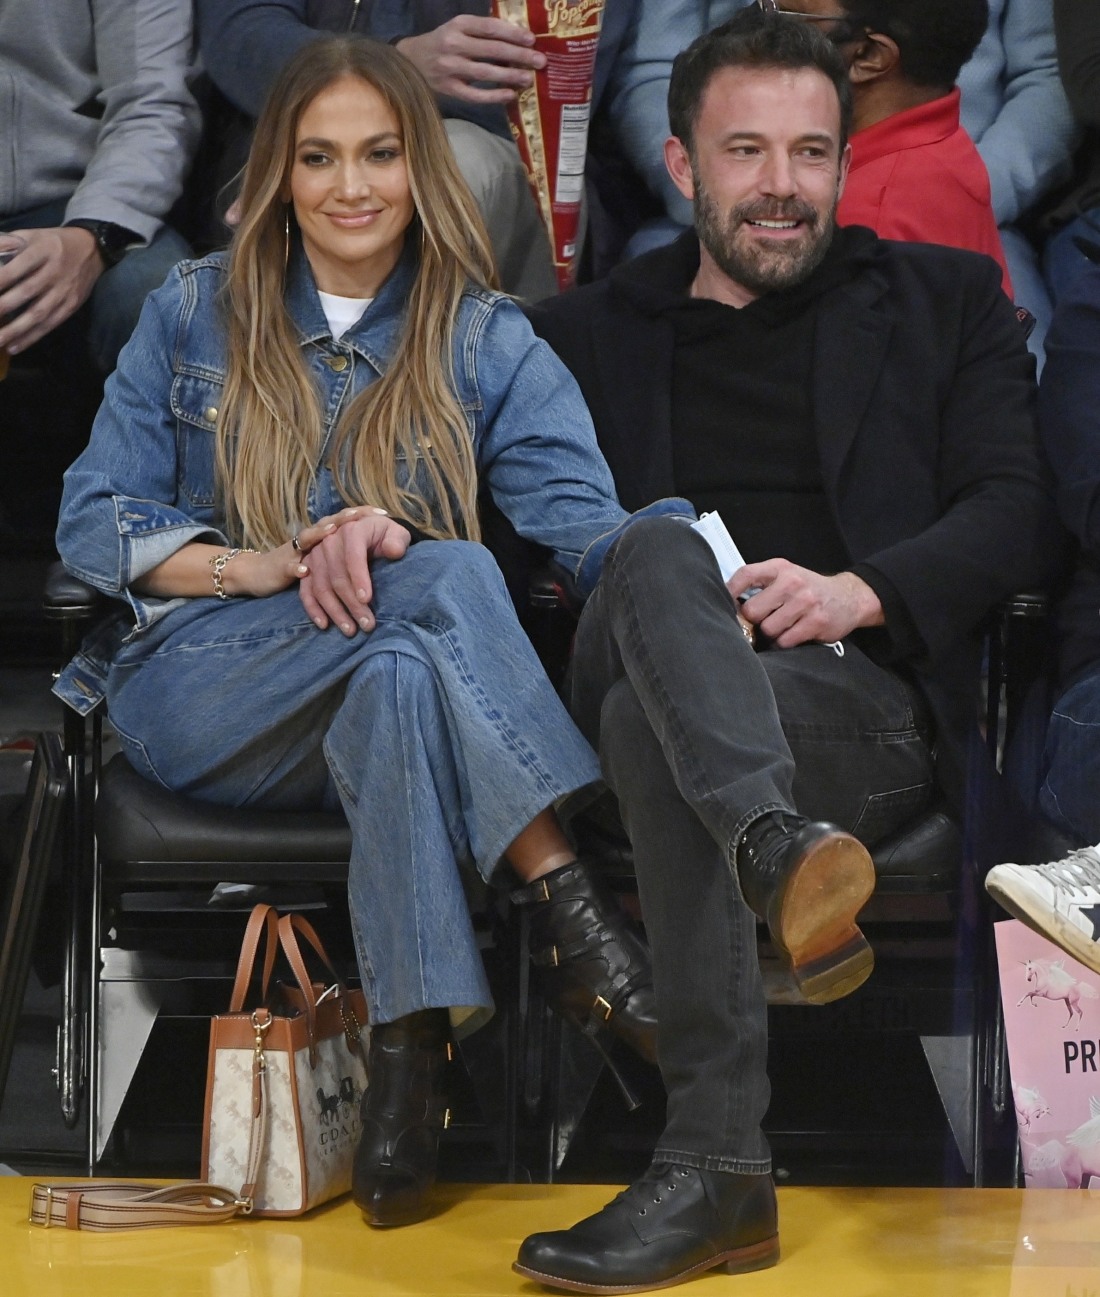 Jennifer Lopez and Ben Affleck get cozy during a courtside date at the Lakers game!